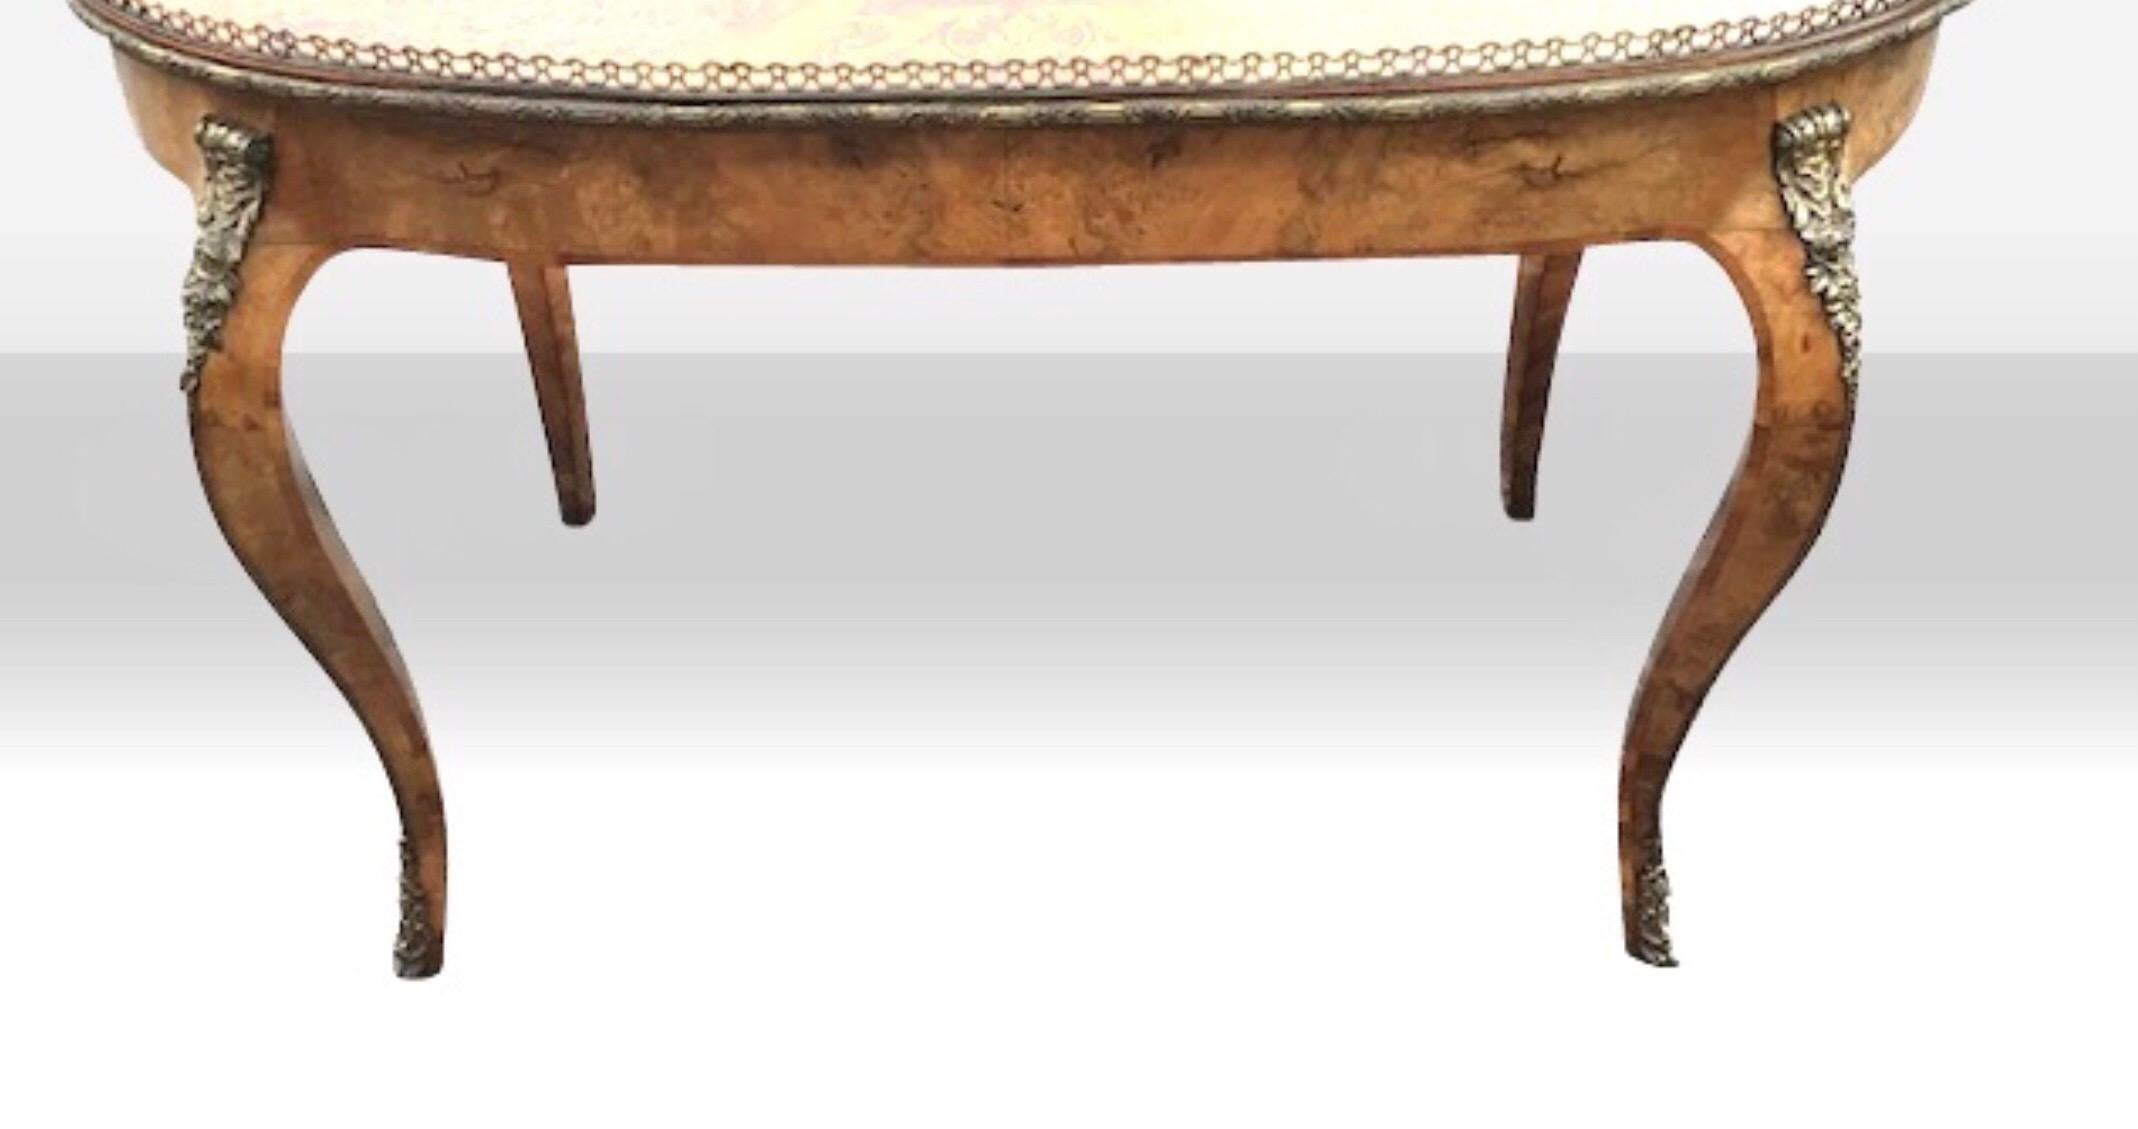 Mid-19th Century Antique Inlaid and Marquetry Burr Walnut Kidney Shaped Table Desk For Sale